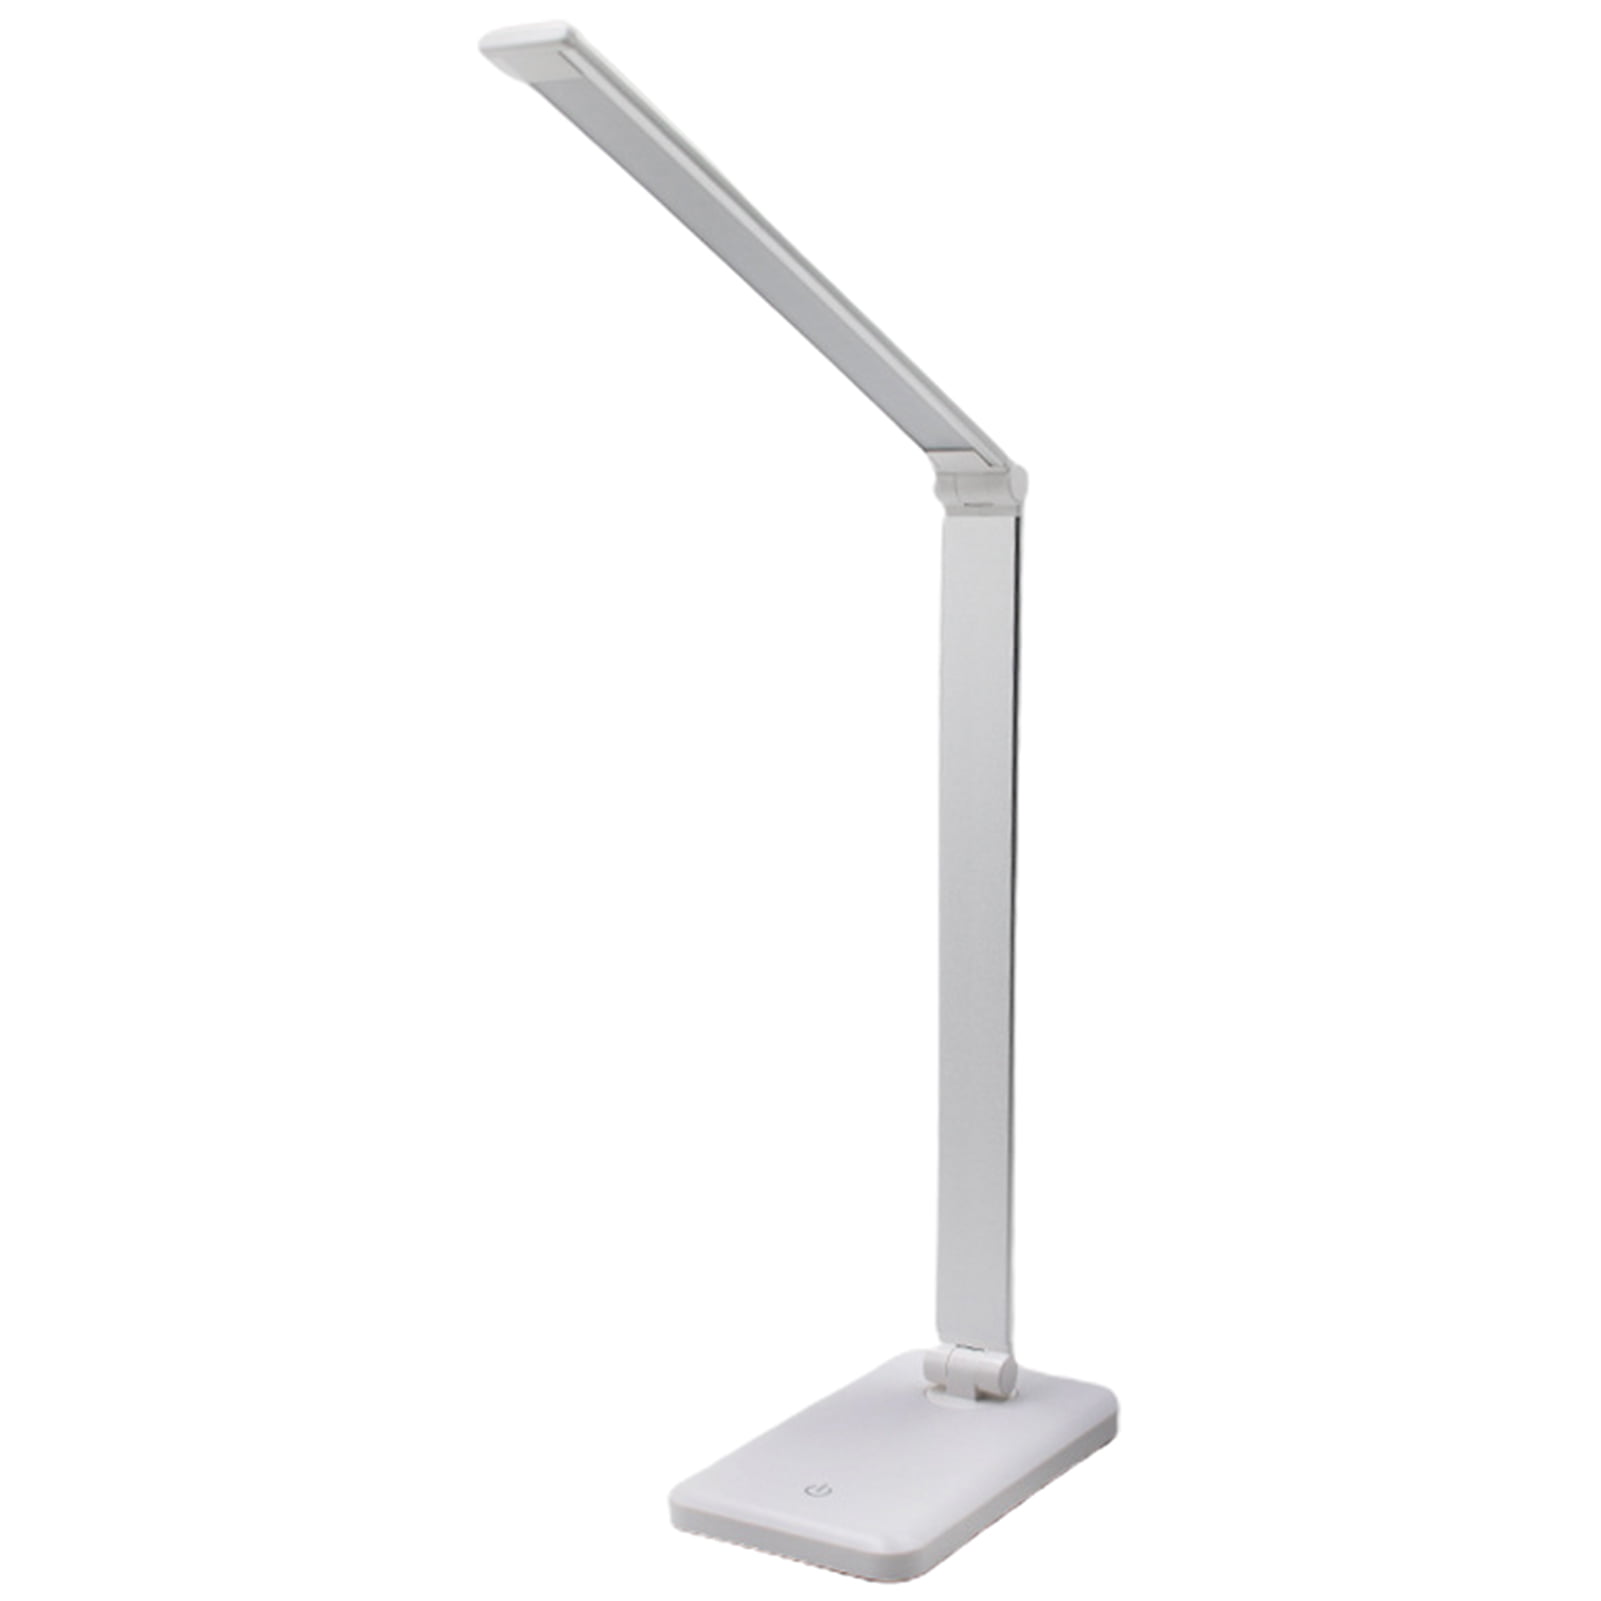 LASTAR Desk Lamp, Dimmable 12W LED Desk Lamps with  USB Charging Port, Color Modes, Brightness Levels, 1Hour Timer, Night  Light, Memory Function, E 価格比較